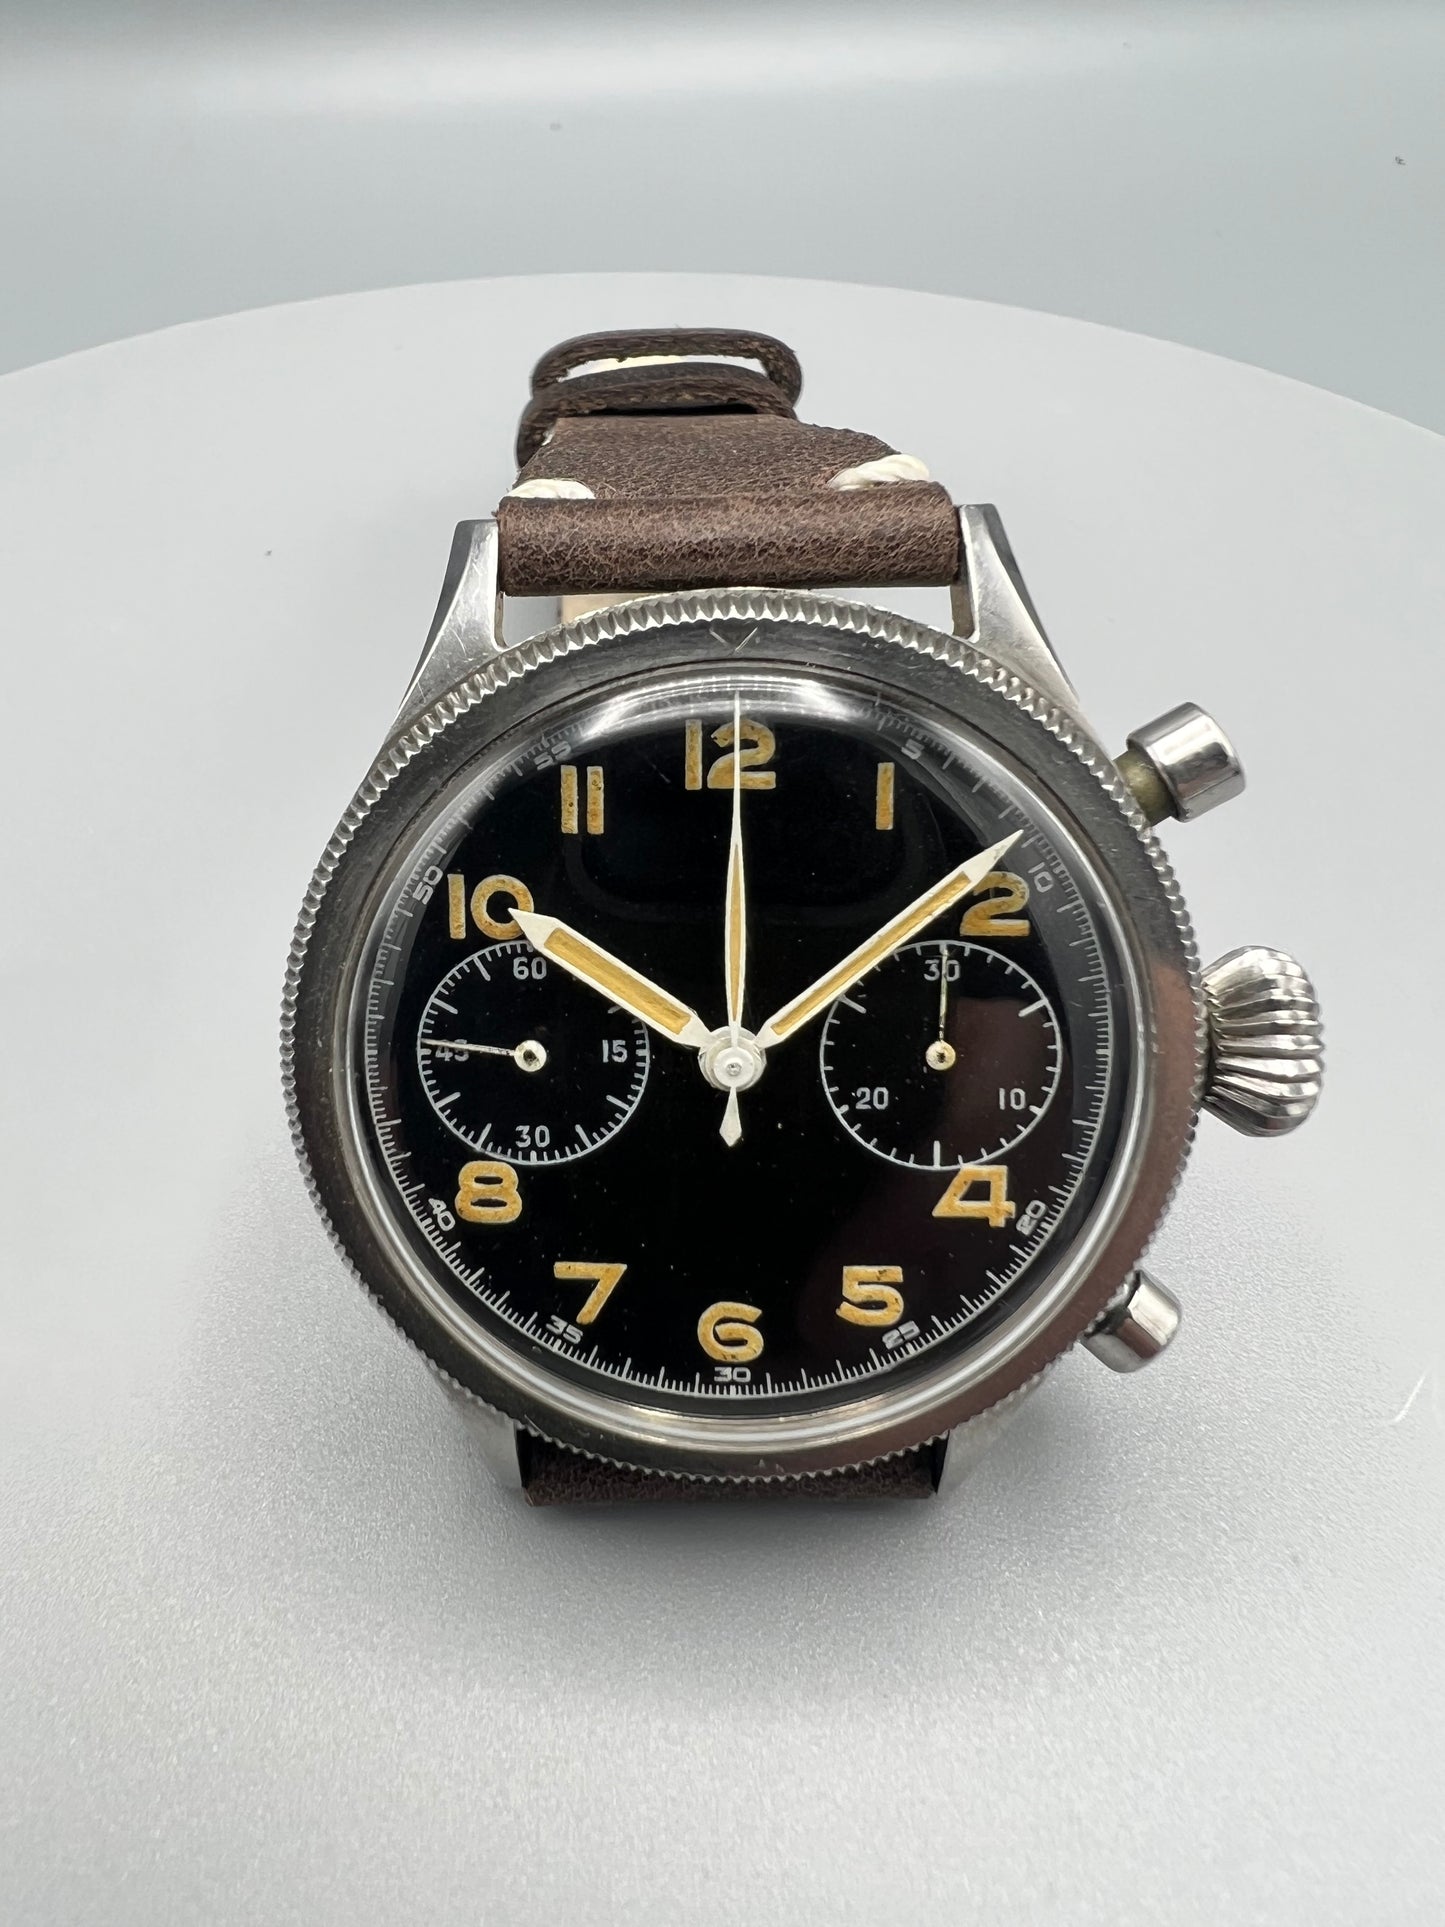 Breguet Type 20 Sterile Dial 1956 Unpolished, Rare Unrestored French Military Service Watch